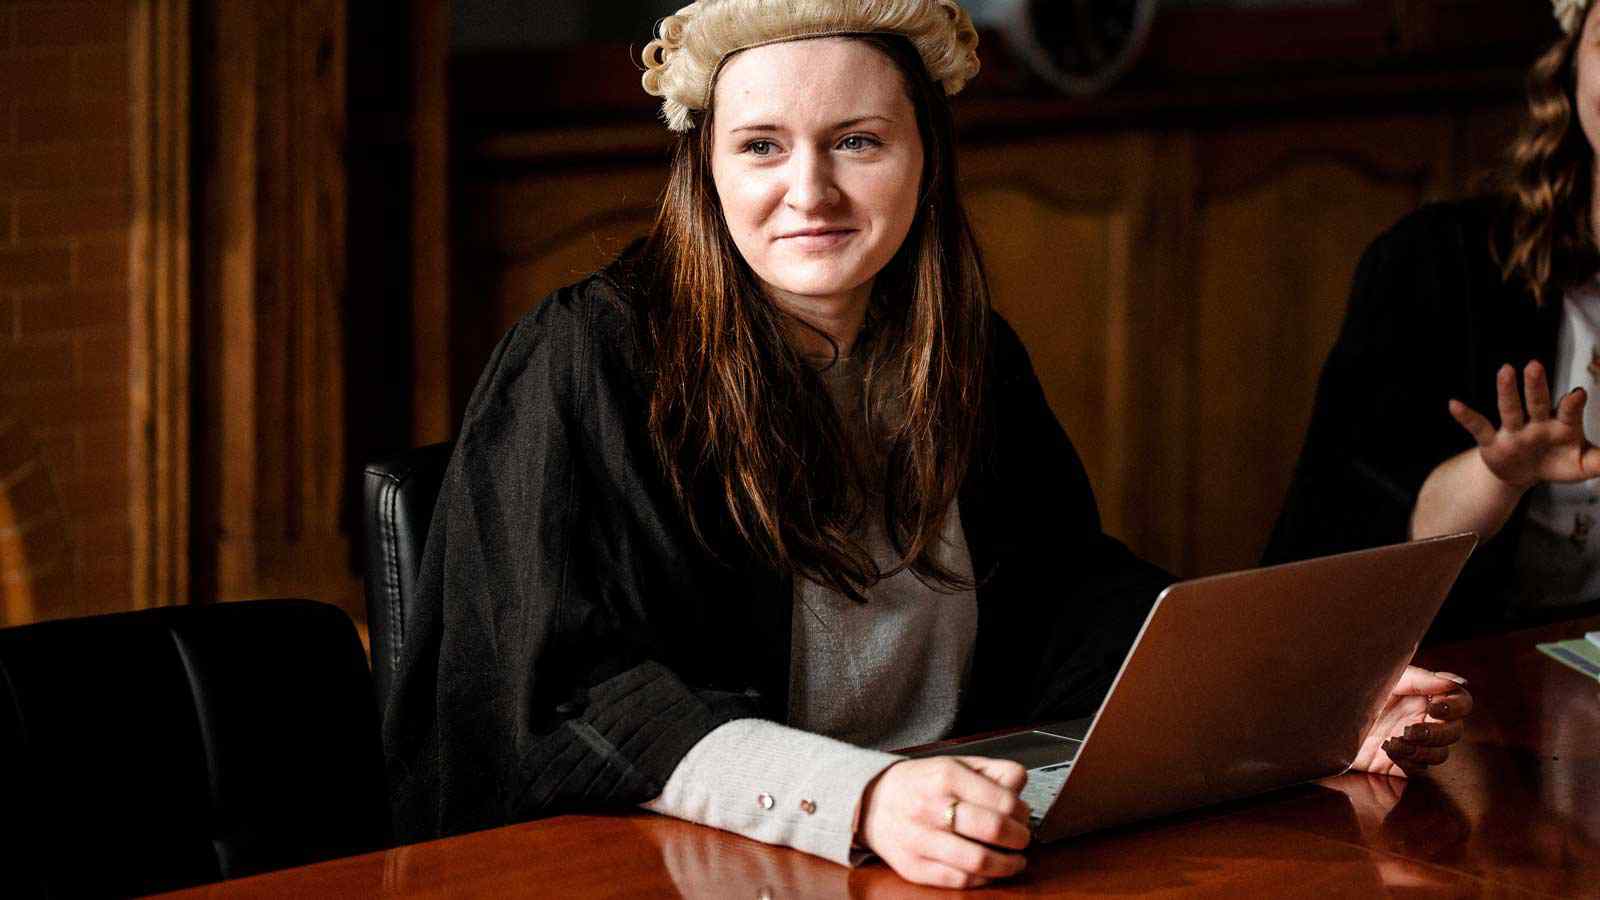 Law student wearing barrister wig sitting at table with laptop in courtroom 